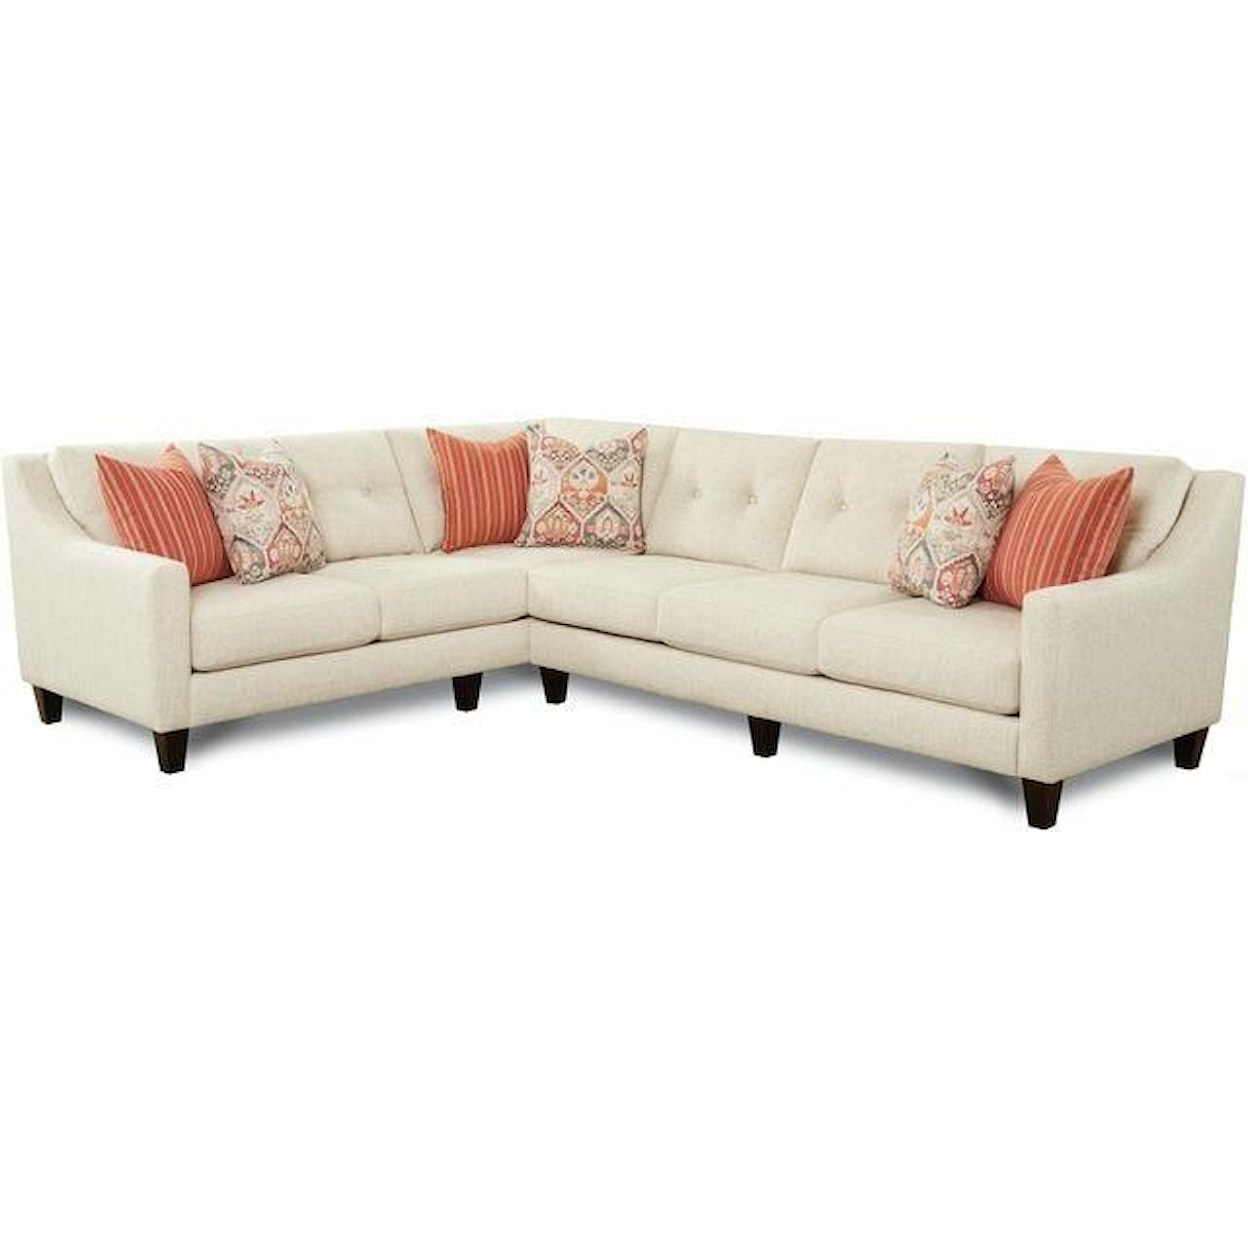 Fusion Furniture 52 Fusion 2 Piece Sectional